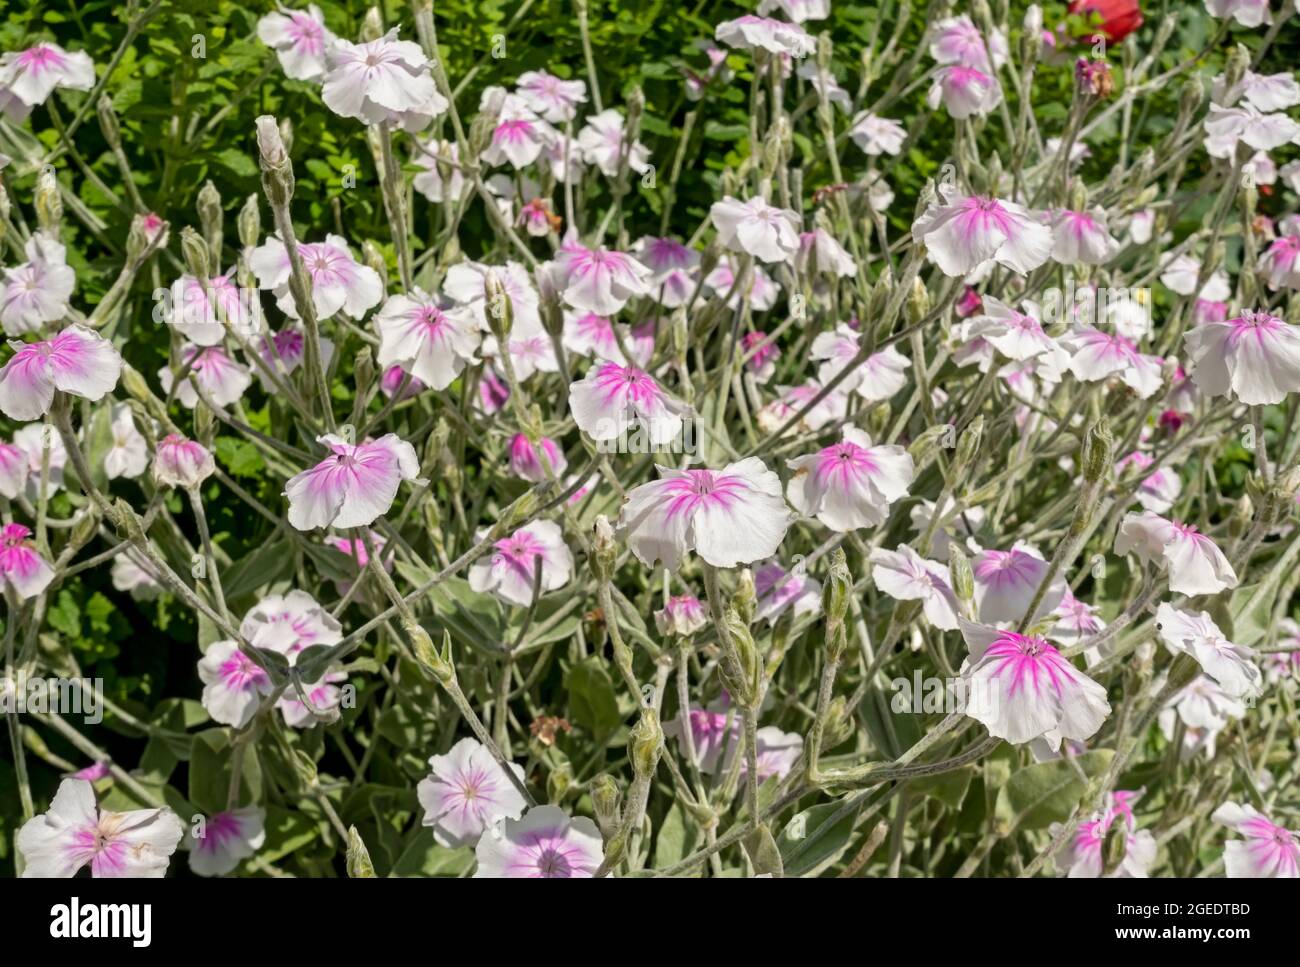 Close up of lychnis coronaria 'Angel's Blush' pink and white flowers in a garden border in summer England UK United Kingdom GB Great Britain Stock Photo